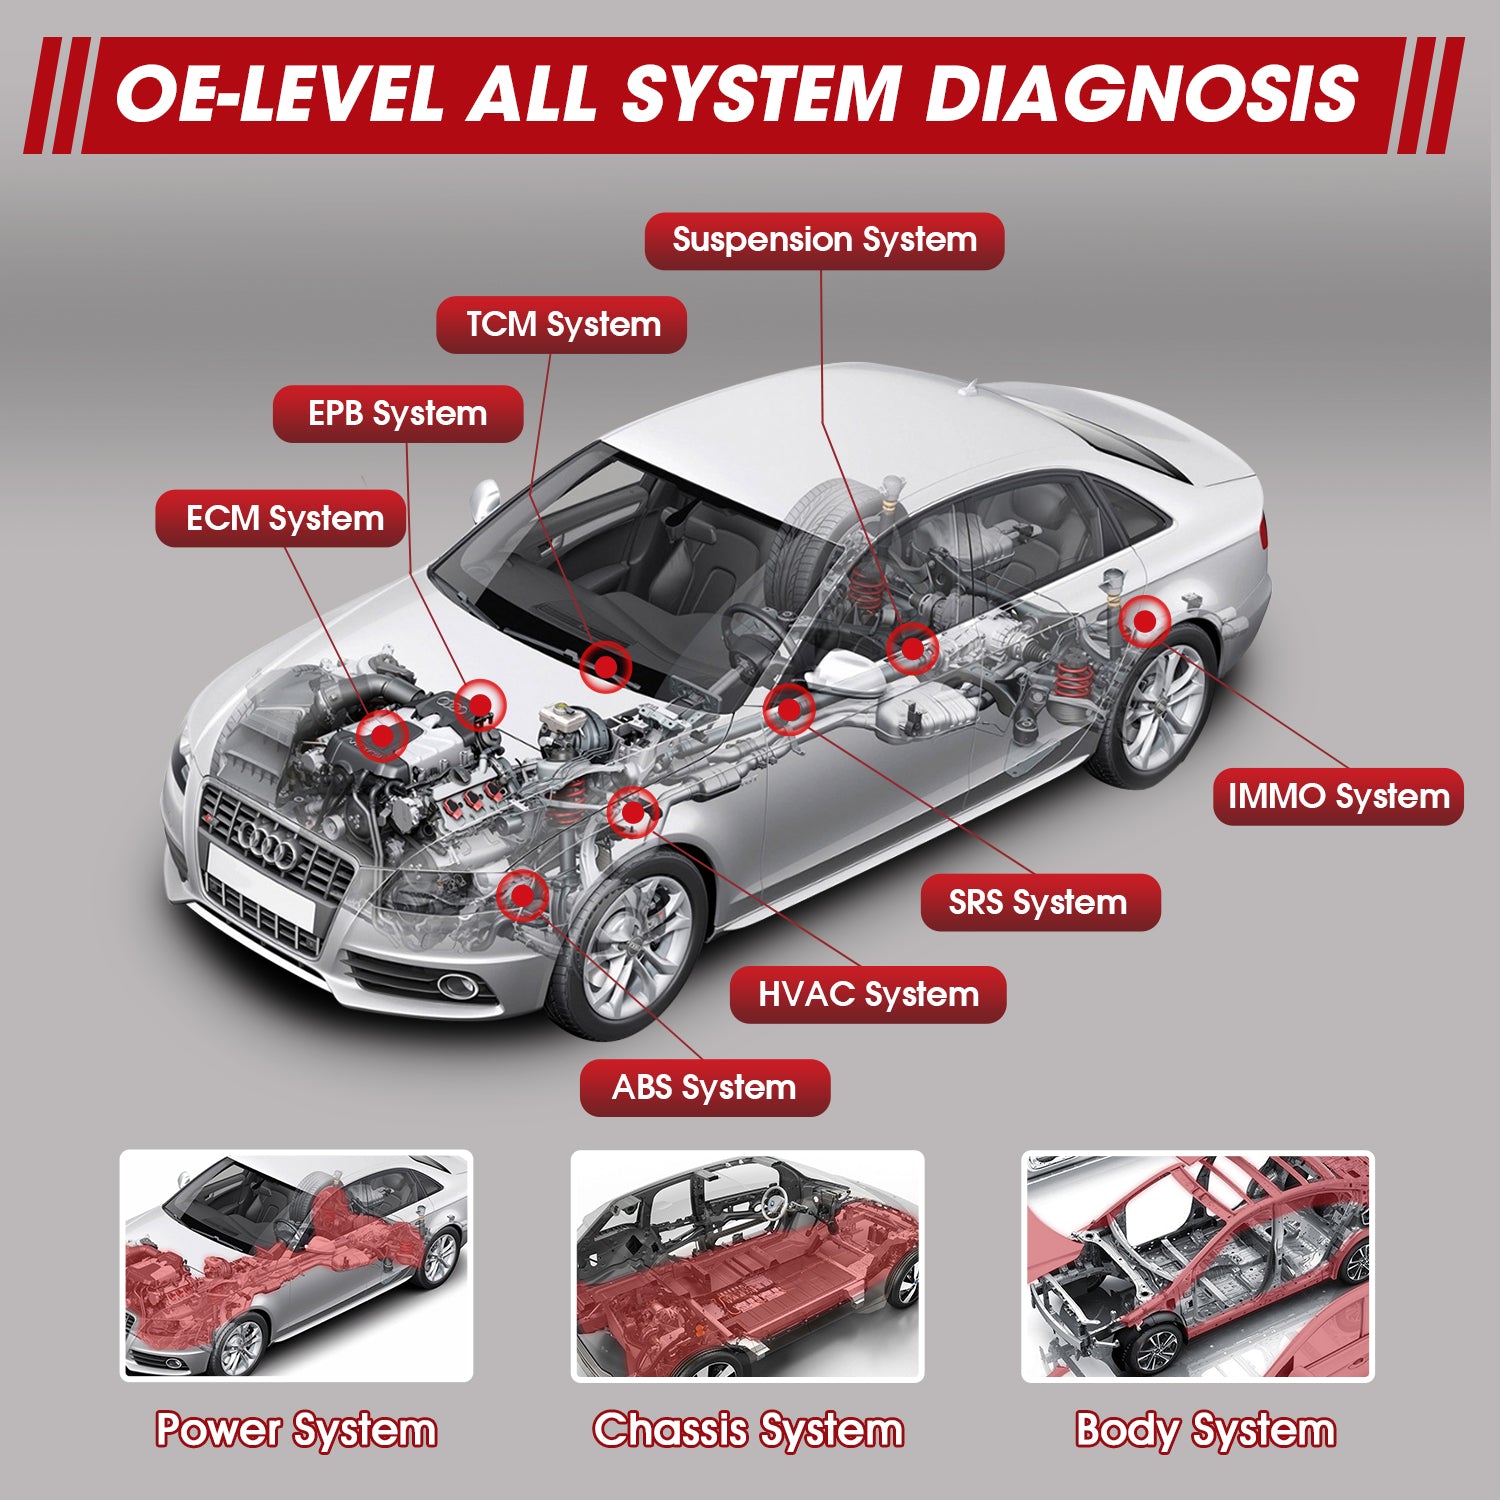 The IM608 Pro Automotive Diagnostics product provides a complete check of your vehicle's system